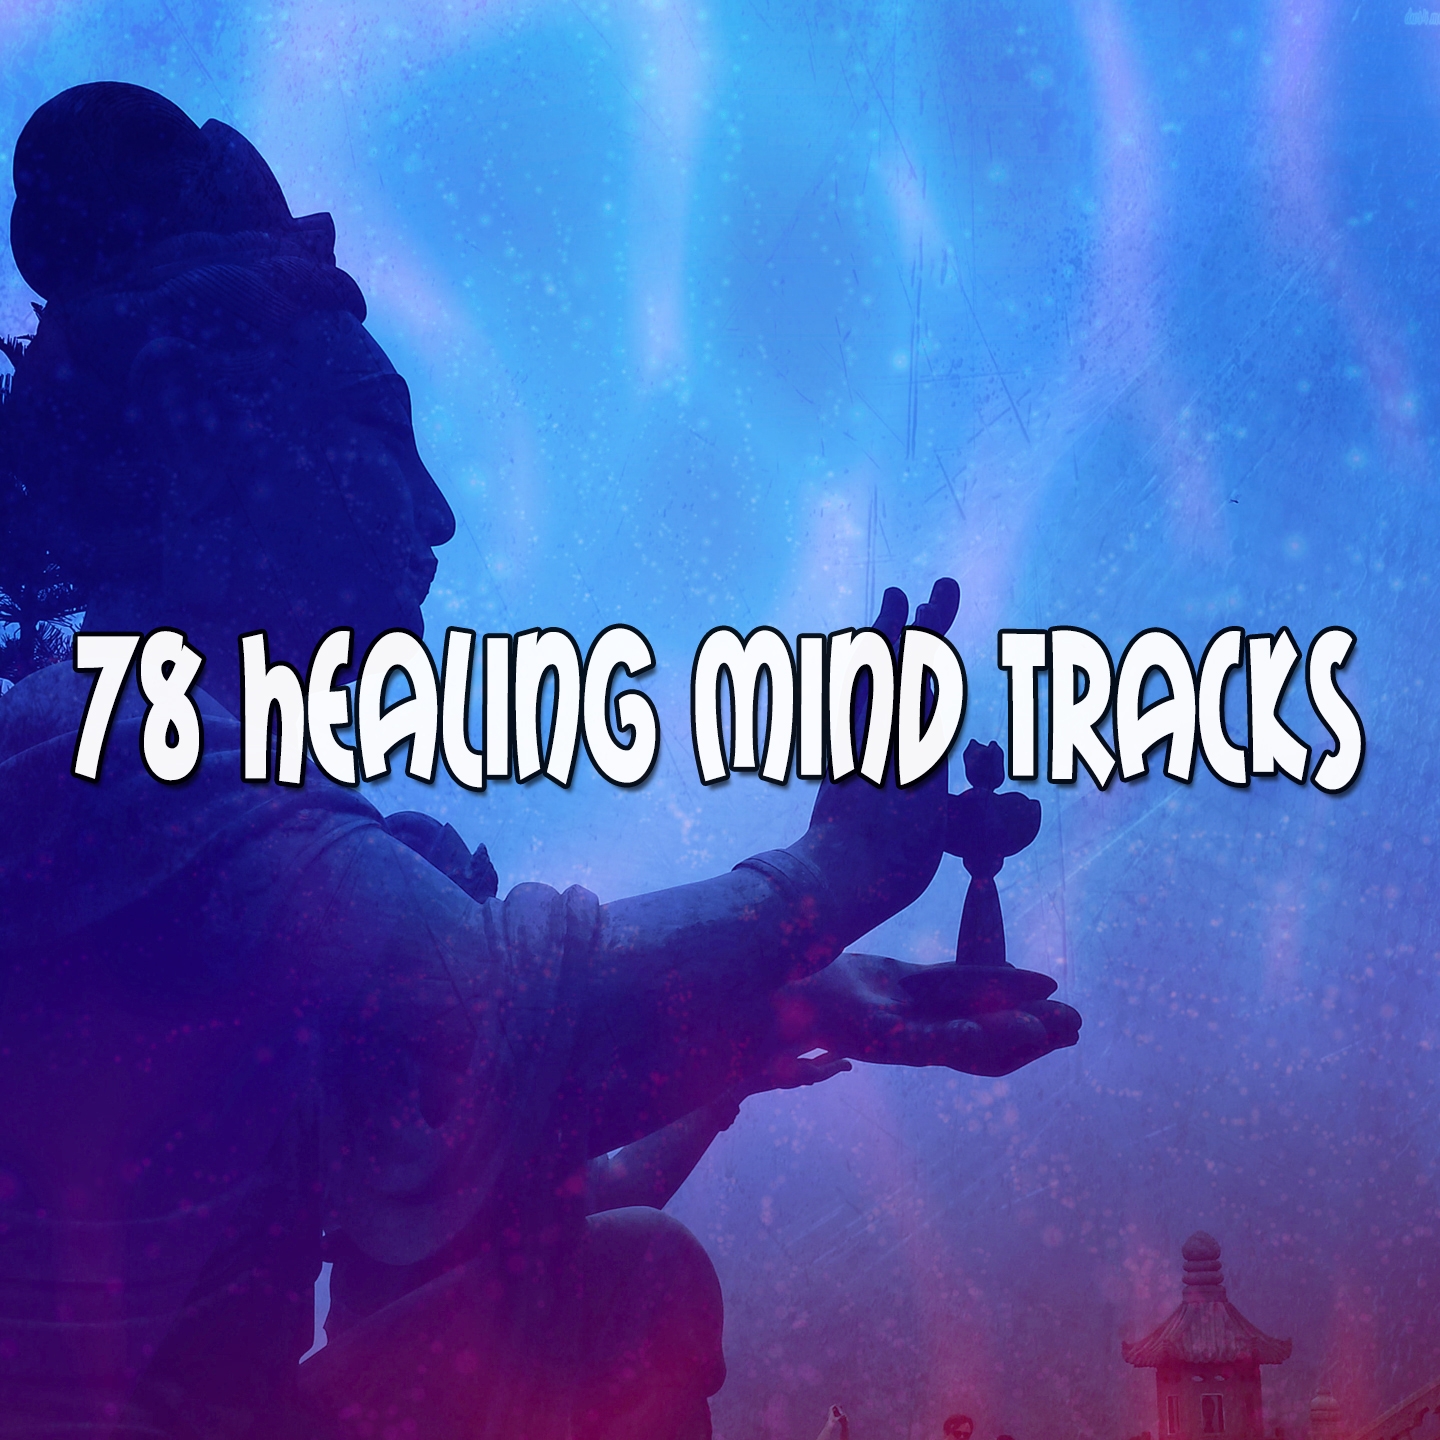 40 Sounds To Relax The Mind